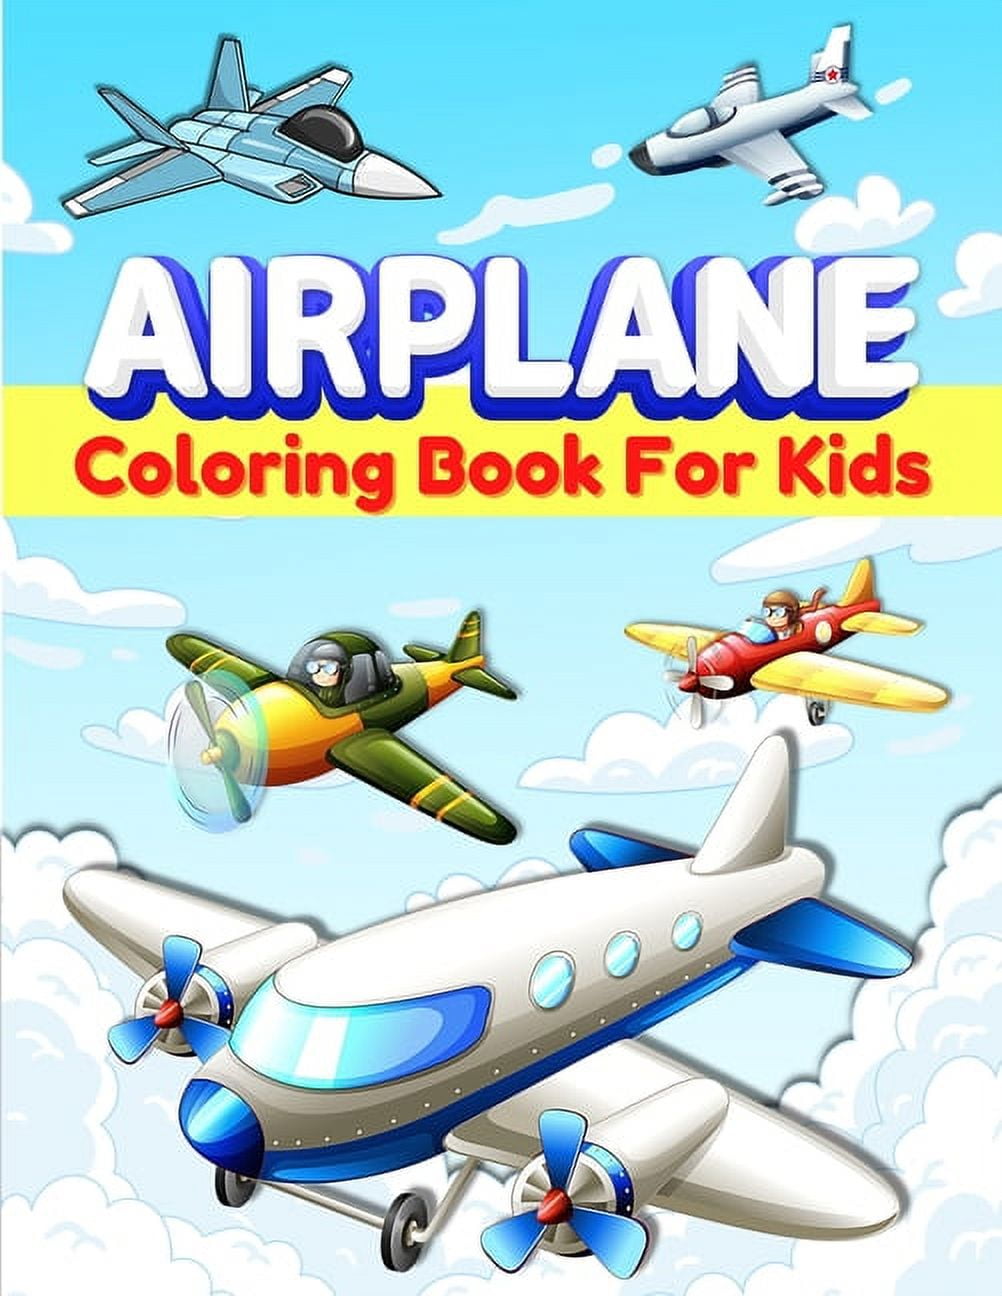 Airplanes Coloring Book For Kids: Fun Airplane Coloring Pages for Kids, Boys and Girls Ages 2-4, 3-5, 4-8. Great Airplane Gifts for Children And Toddlers Who Love To Play With Airplanes. Big Activity Book For Preschoolers. [Book]